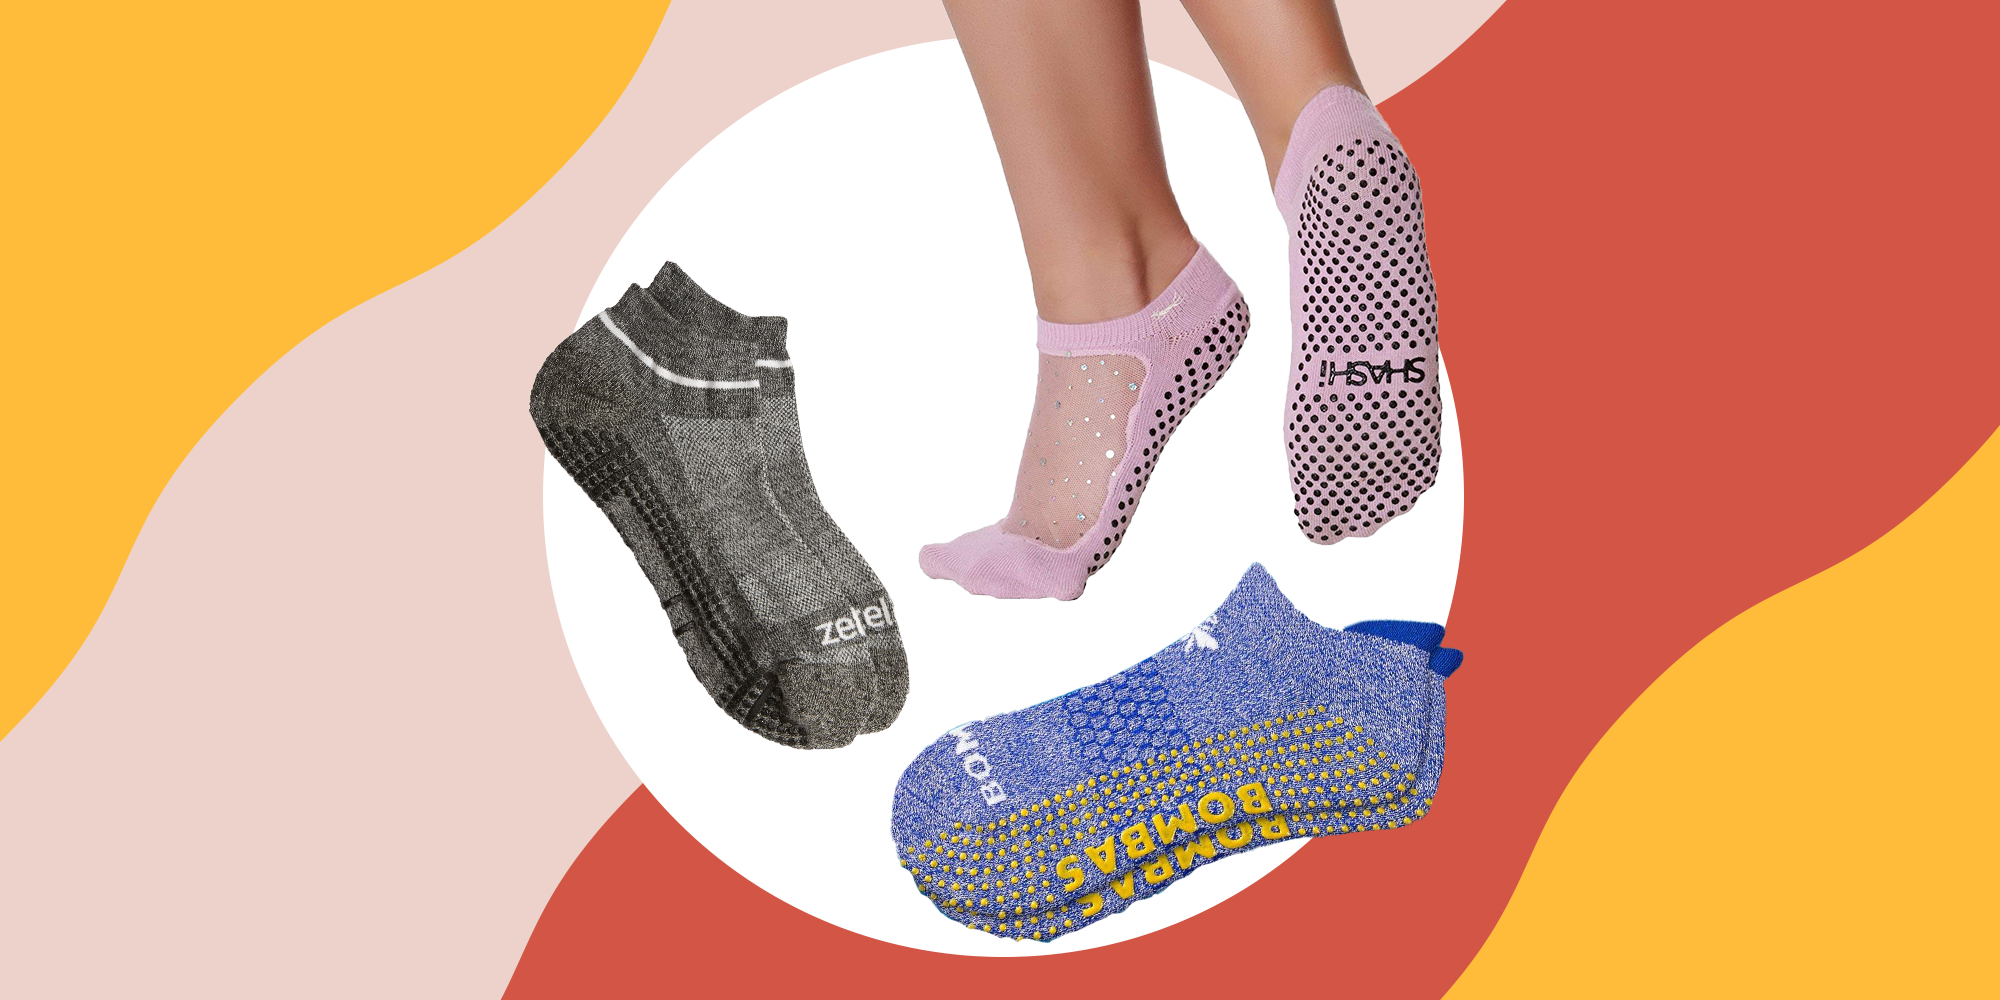 Details about   Non-slip Ballet Socks Round Toe Cotton Workout Running Training Sports Yoga Sock 